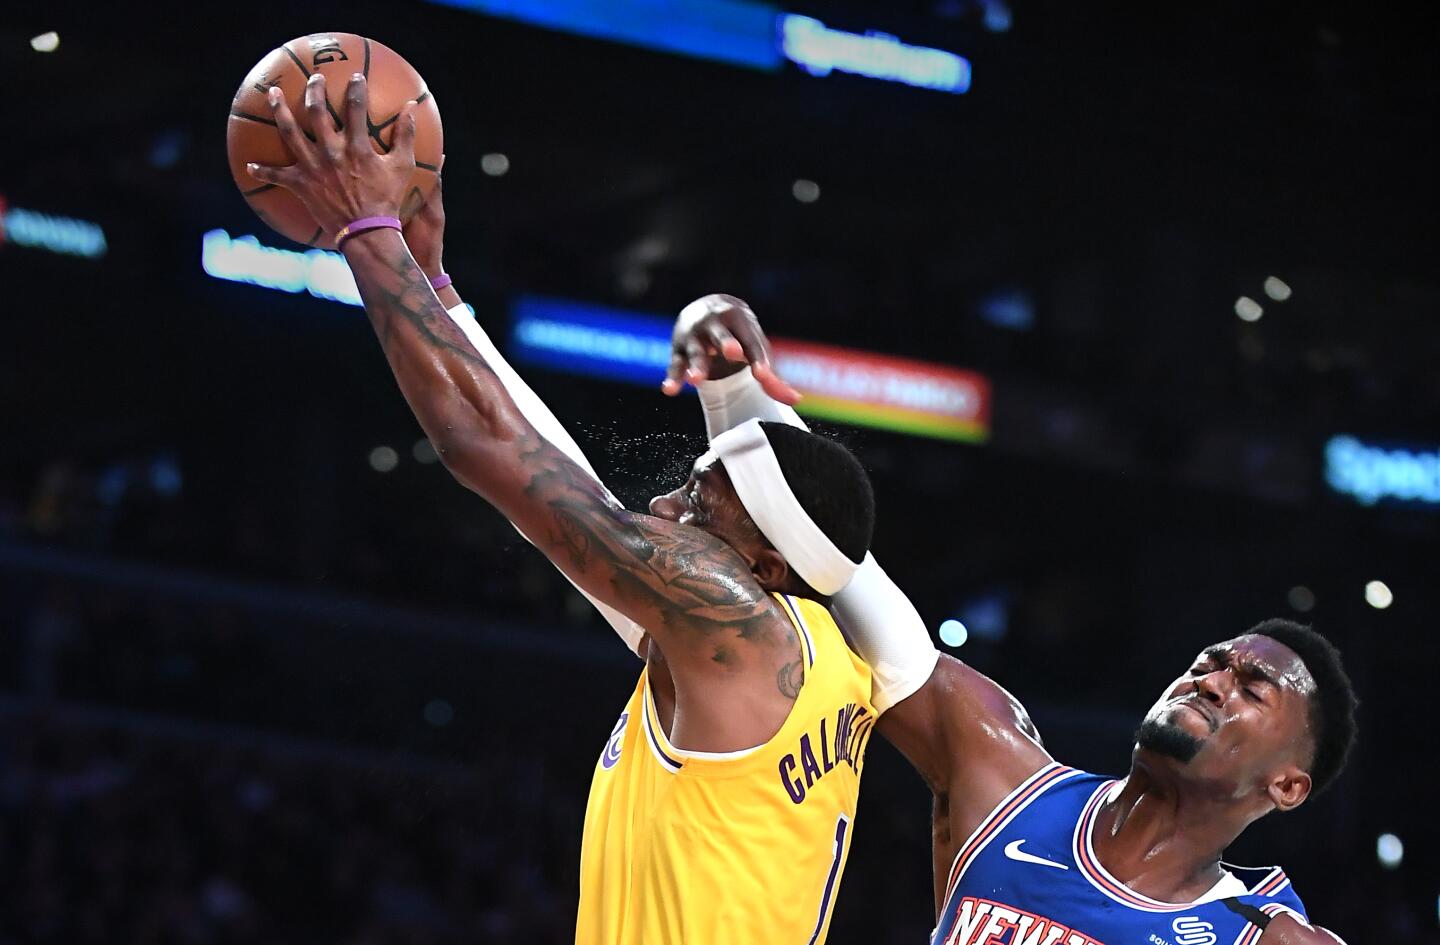 Lakers guard Kentavious Caldwell-Pope is hit in the head by Knicks forward Bobby Portis while driving to the basket during the second quarter of a game Jan. 7 at Staples Center.